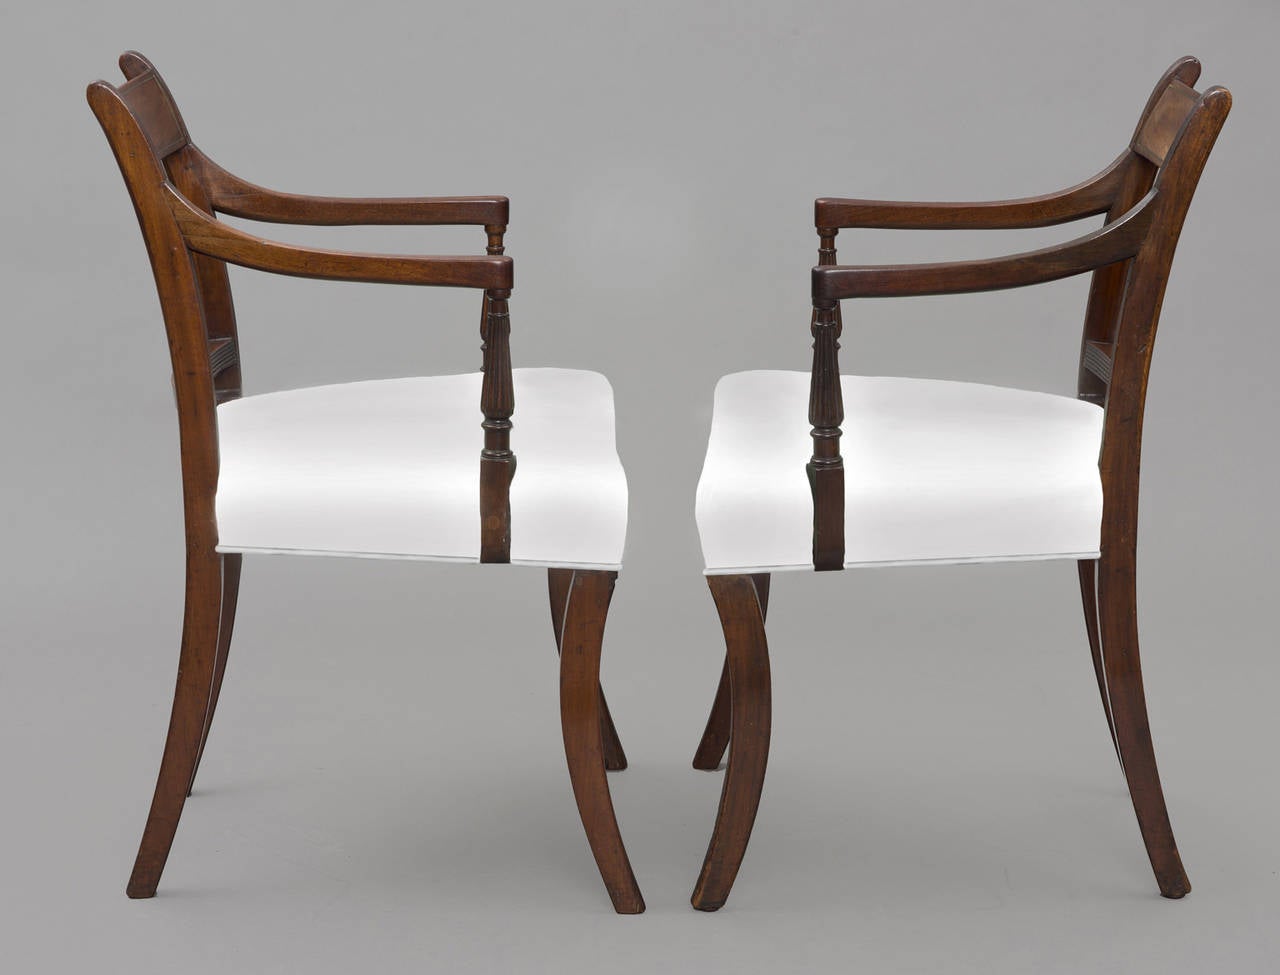 Carved Pair of English Regency Period Lyre-Back Armchairs, circa 1810